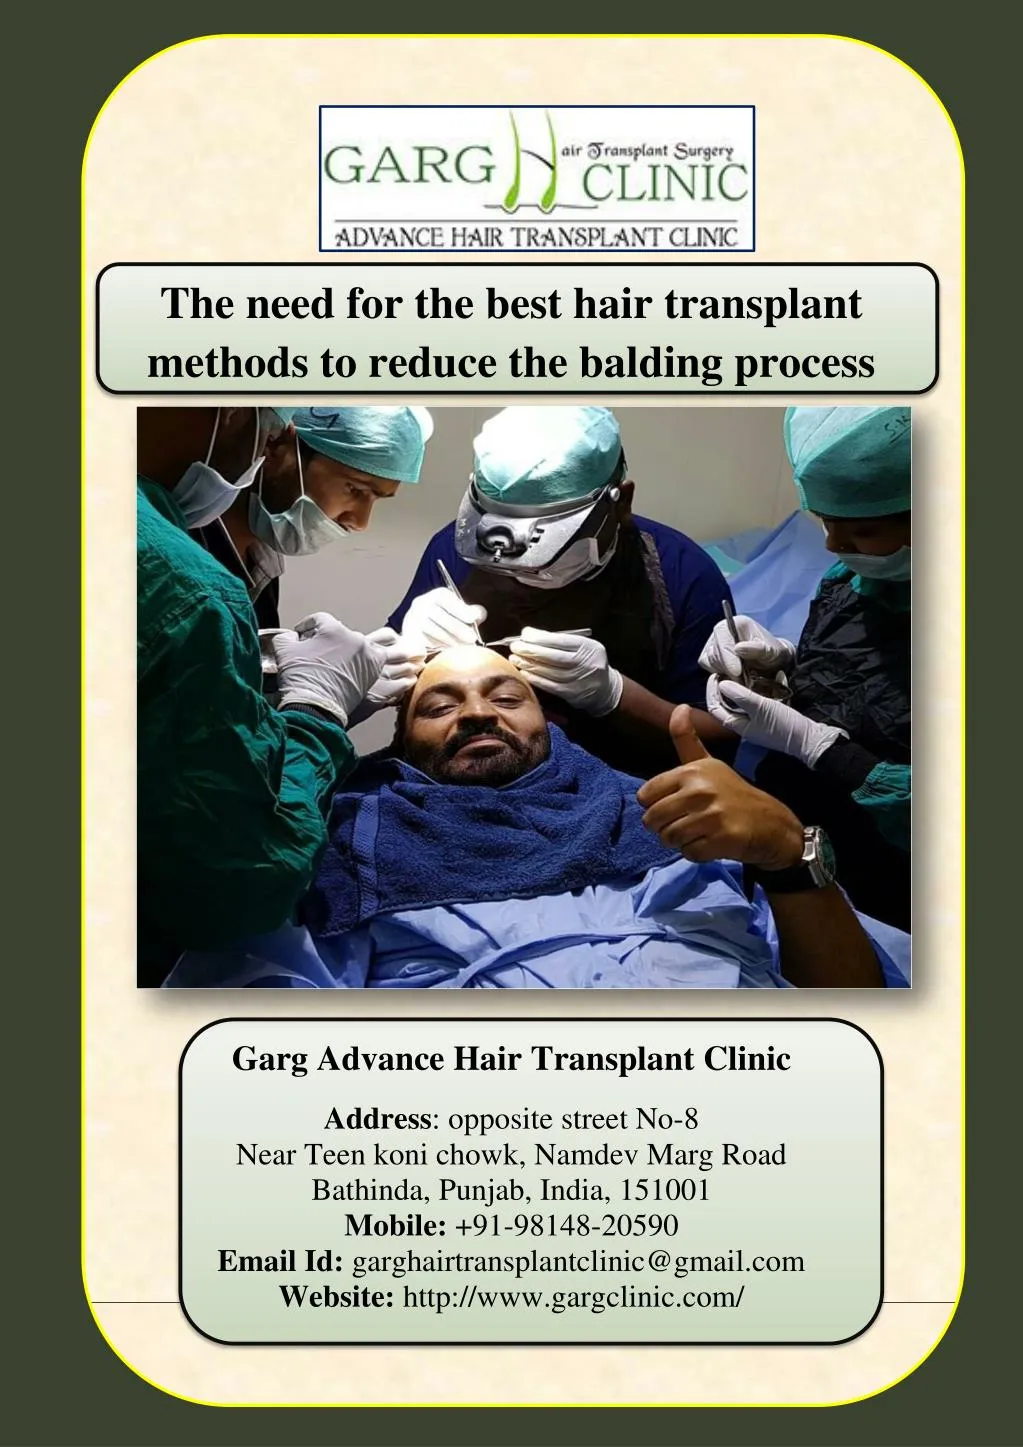 the need for the best hair transplant methods